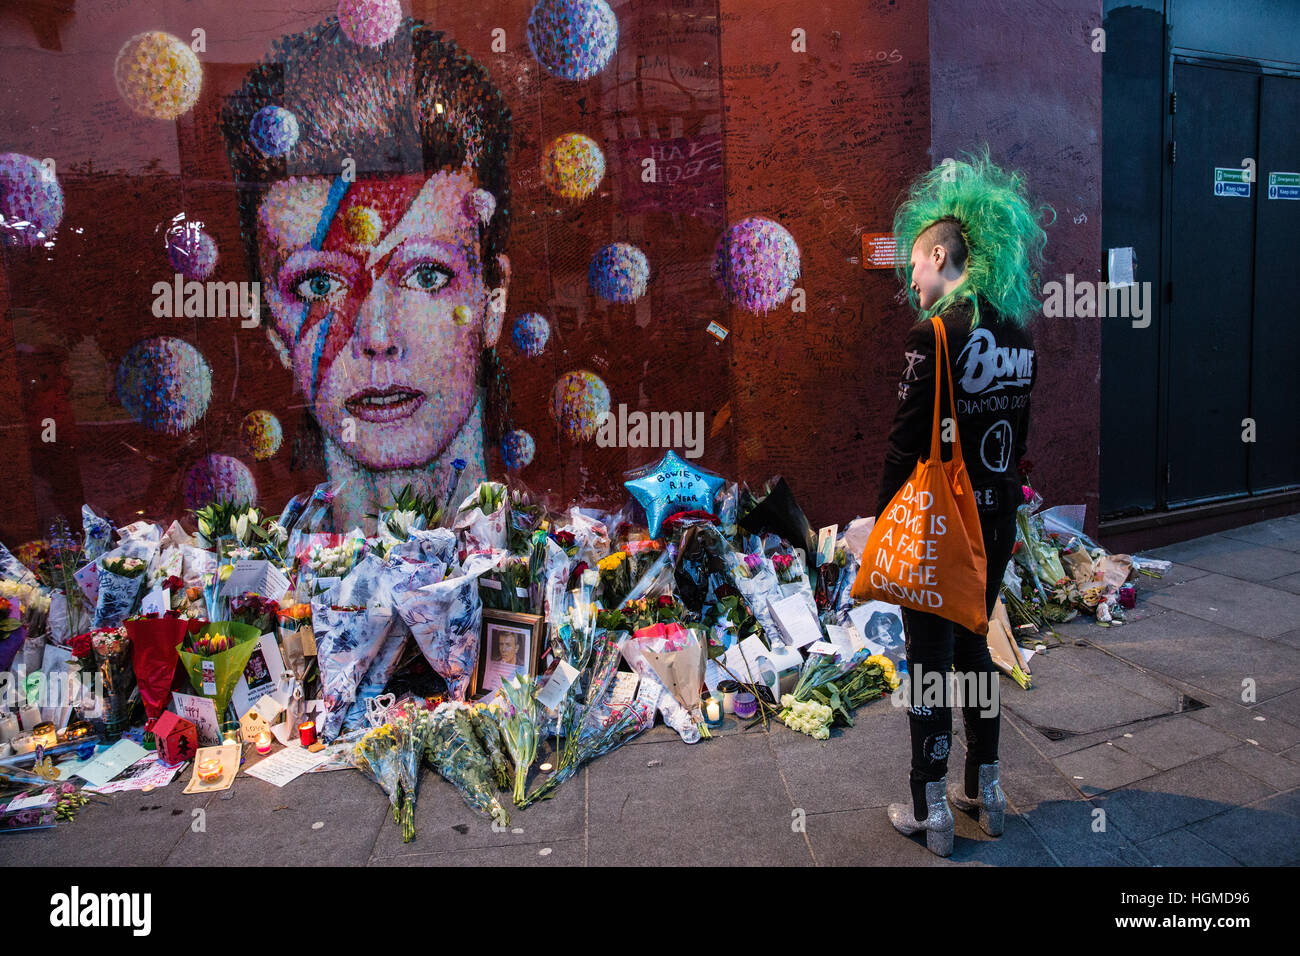 London, UK. 10th January, 2017.  A girl with a green mohican haircut pays tribute to David Bowie in front of a mural in Brixton on the first anniversary of his death. Credit: Mark Kerrison/Alamy Live News Stock Photo